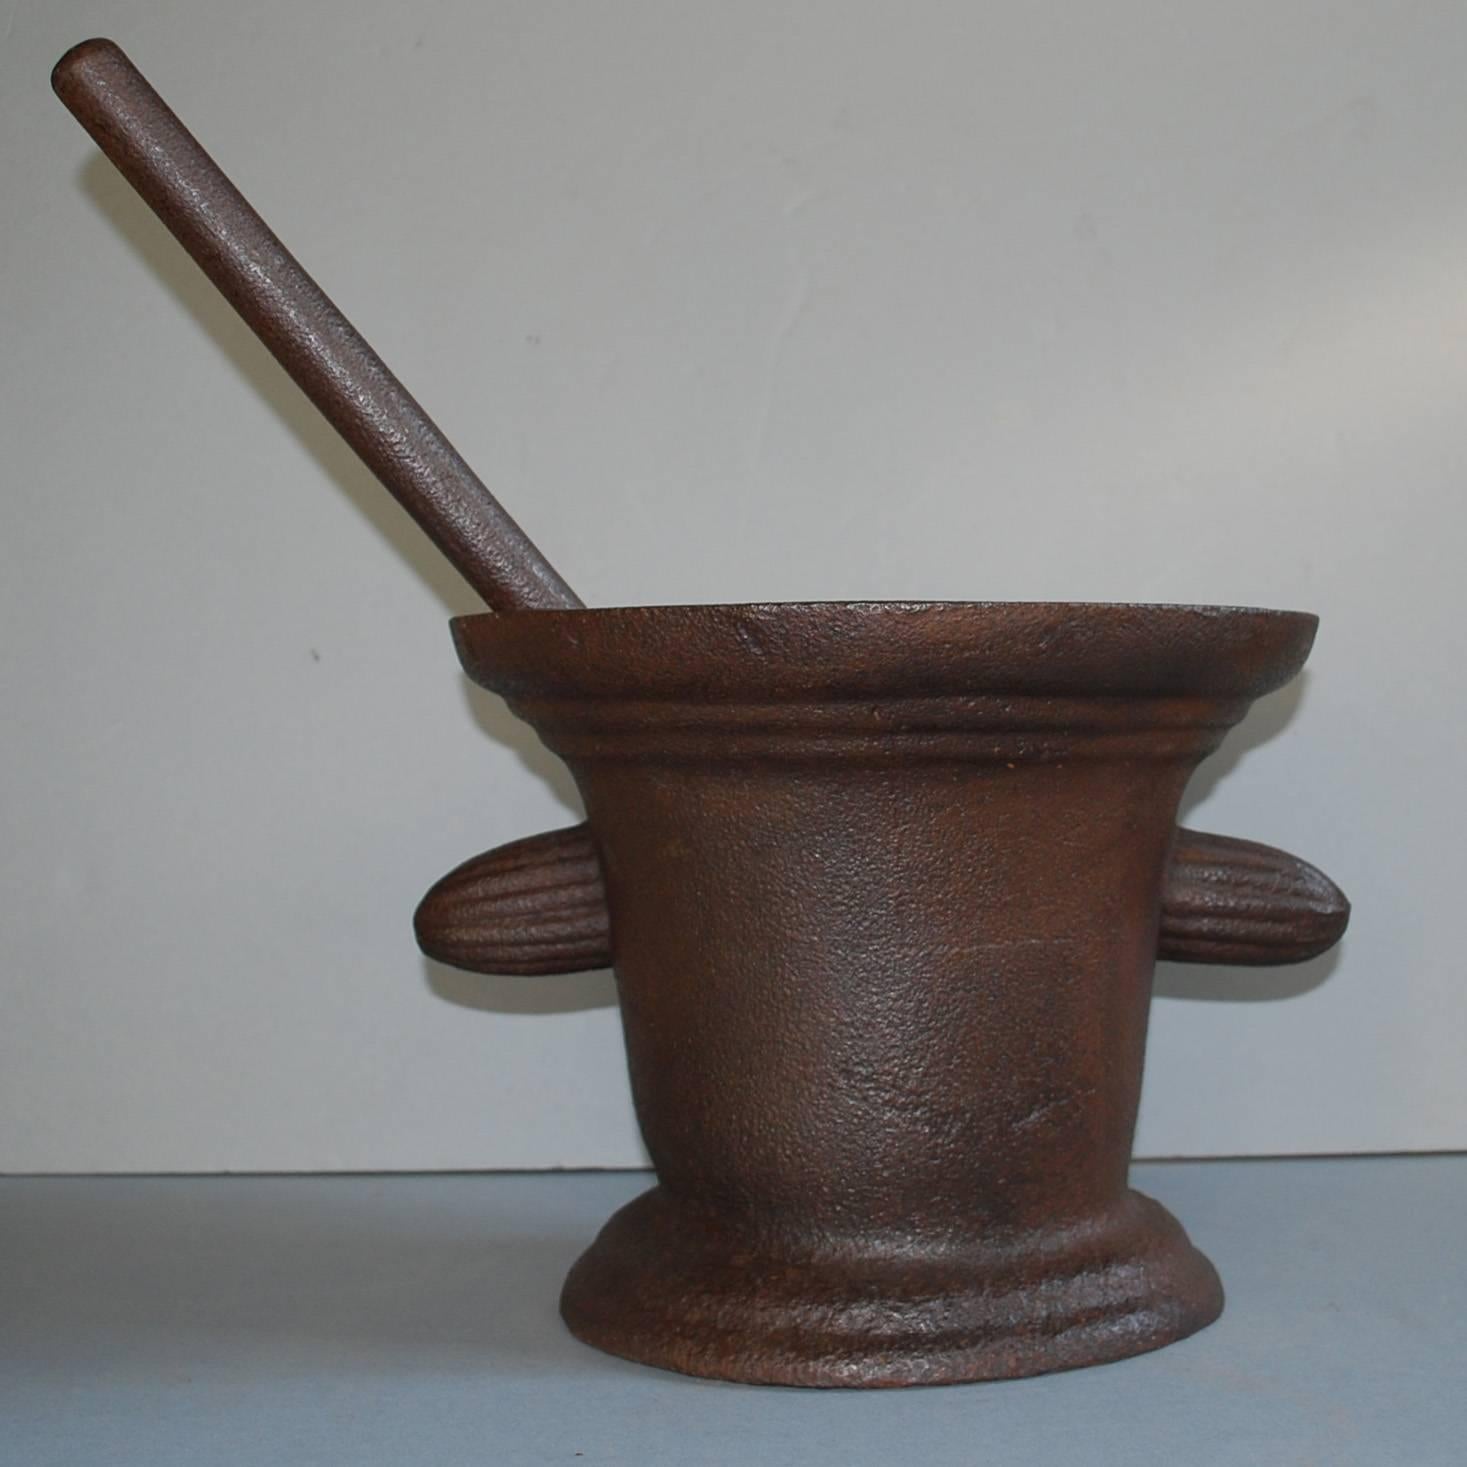 Heavy, large mortar and pestle made from cast iron.
Originates France, dating circa 1850.
(shipping cost on request, depends on destination).